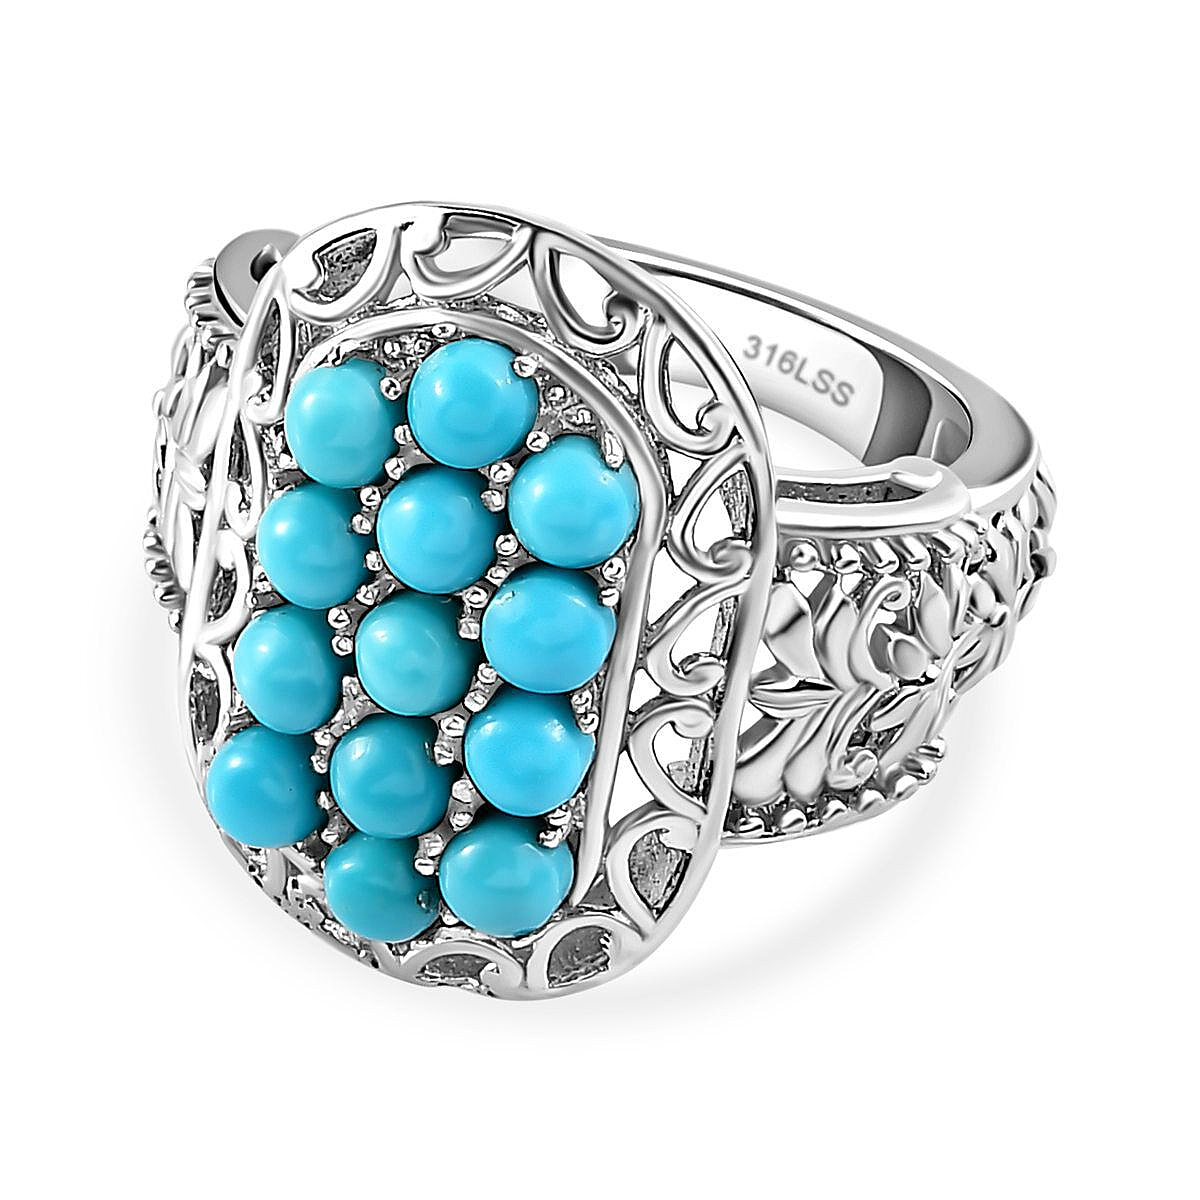 Arizona Sleeping Beauty Turquoise Ring in Stainless Steel 1.26 Ct